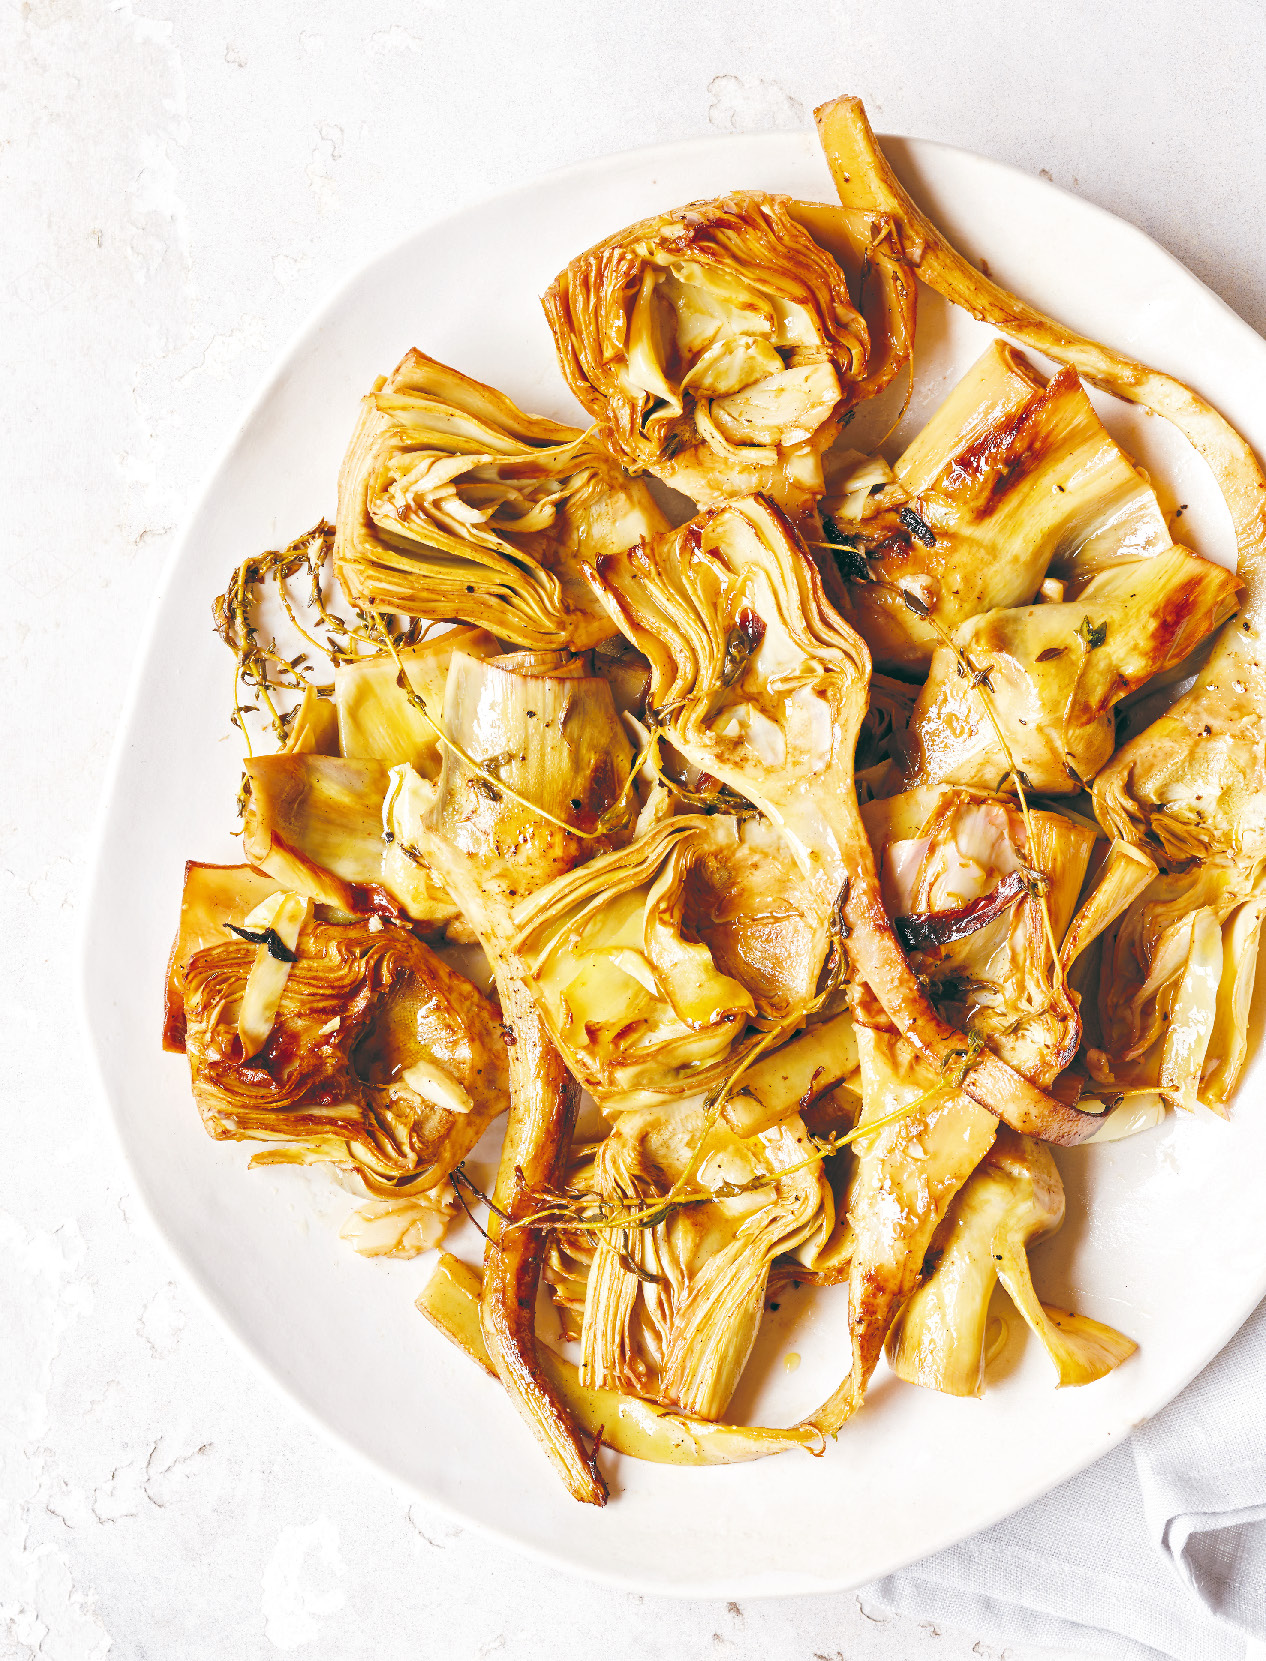 Braised artichokes with white wine and thyme